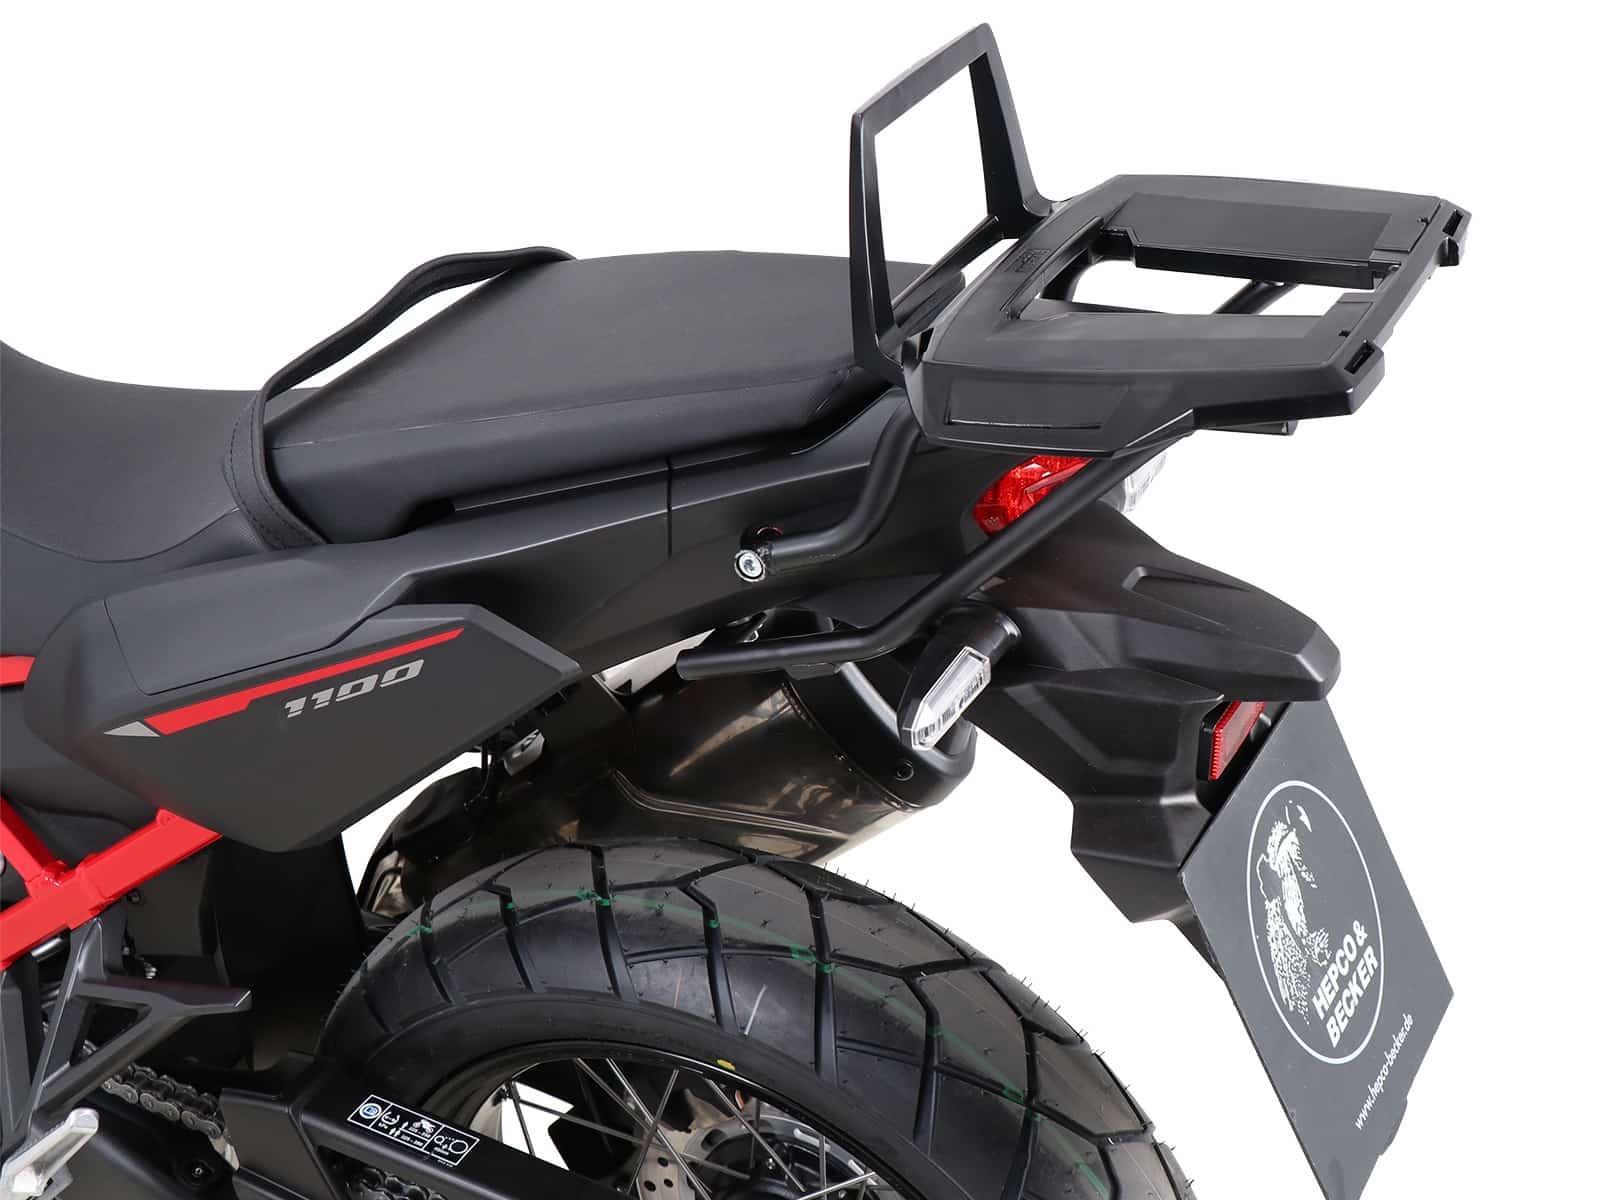 Alurack top case carrier black for Honda CRF 1100 L Africa Twin (2019-)